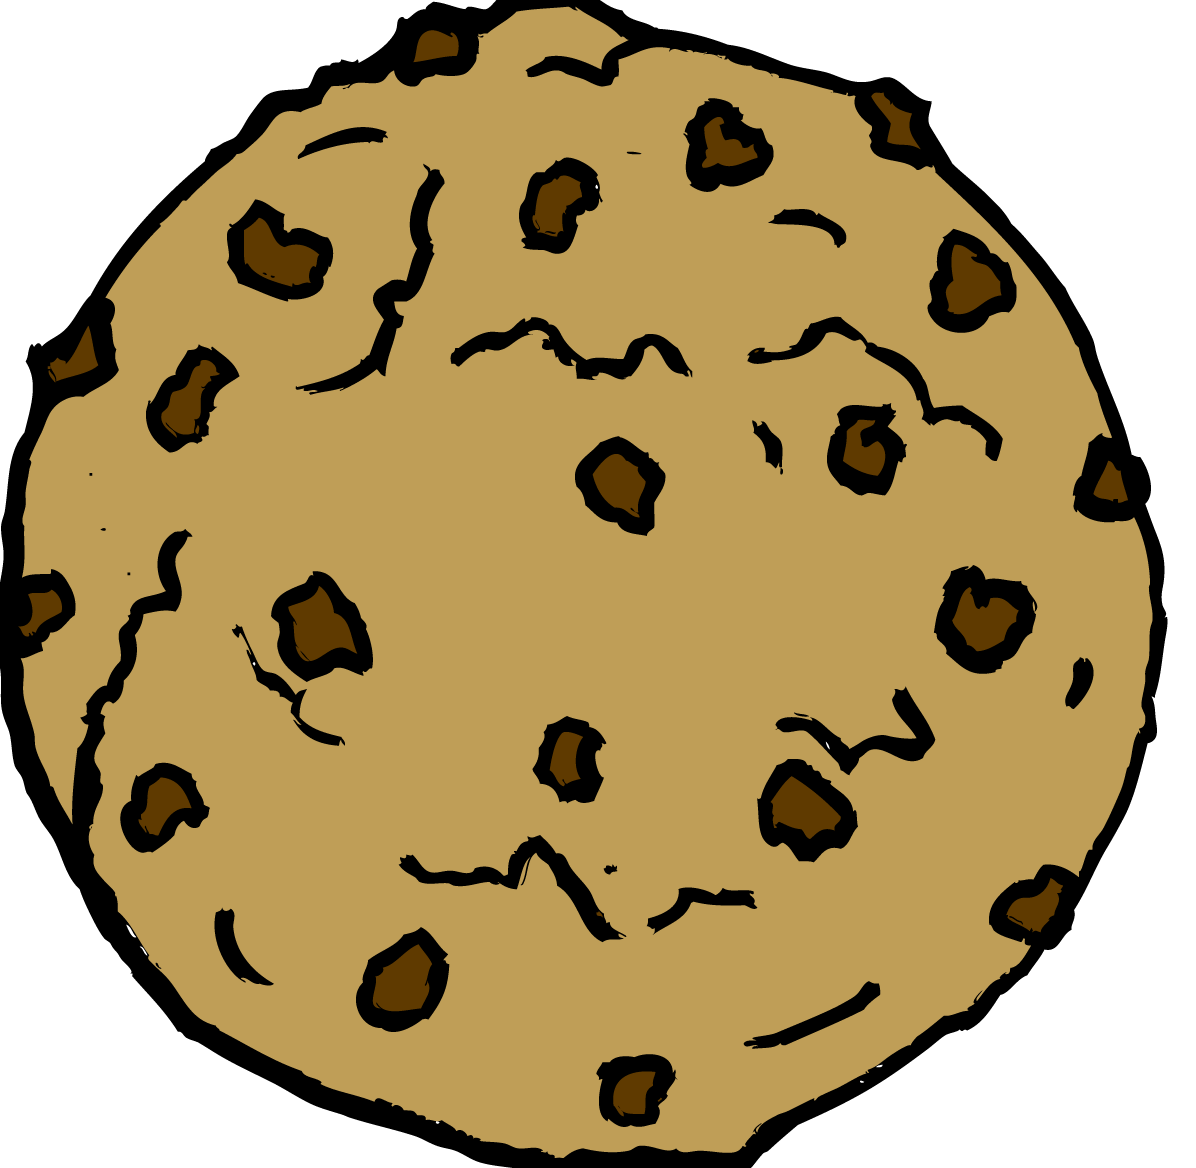 Chocolate Chip Cookie Clipart - Chocolate Chip Cookie Clipart